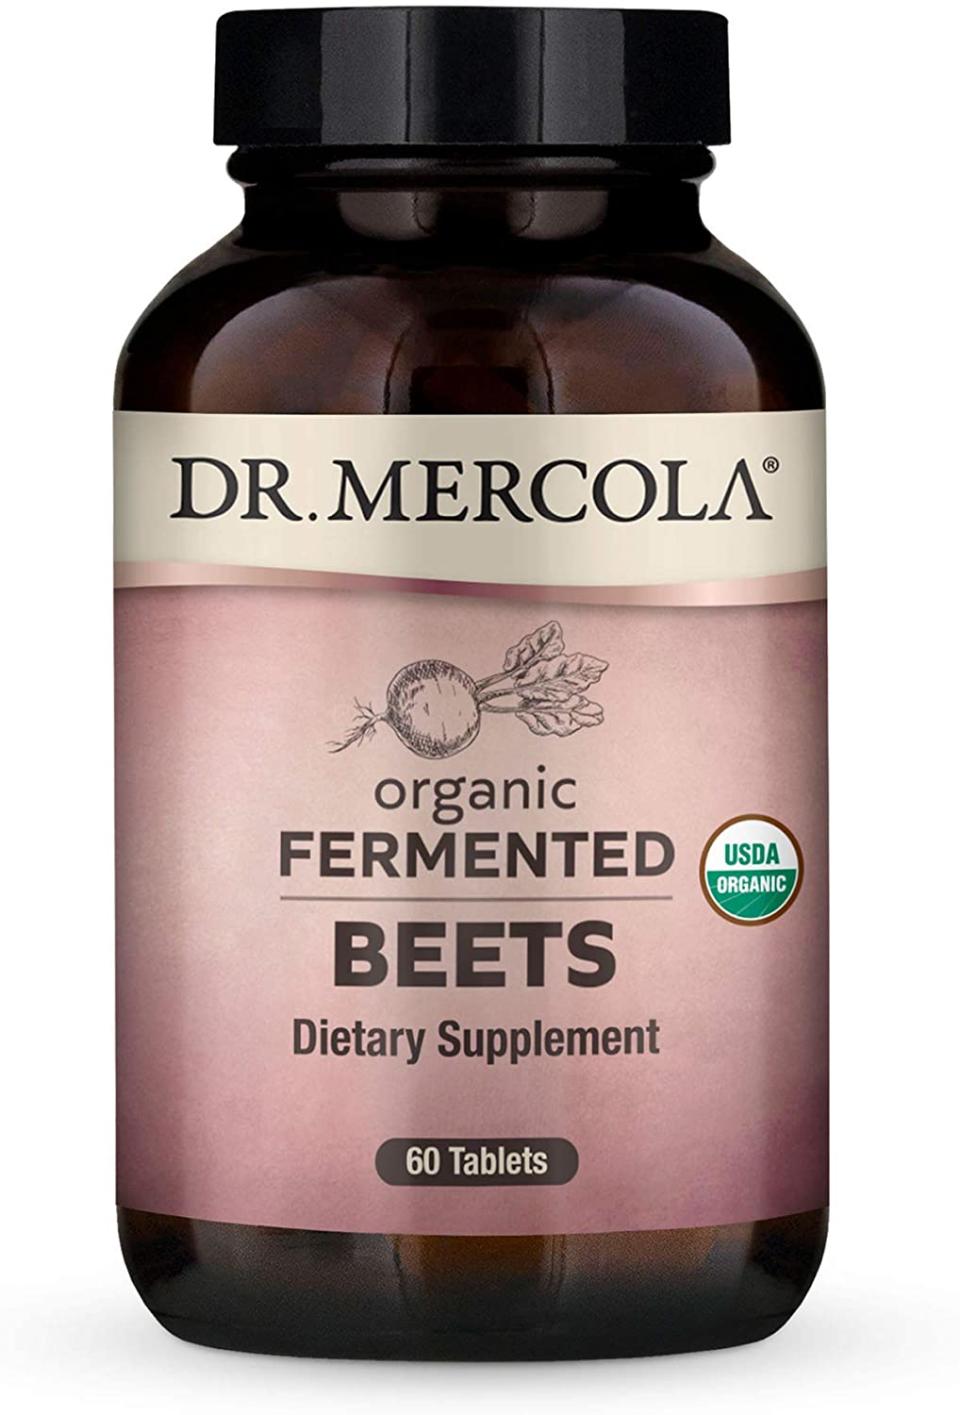 Dr. Mercola Organic Fermented Beets Dietary Supplement